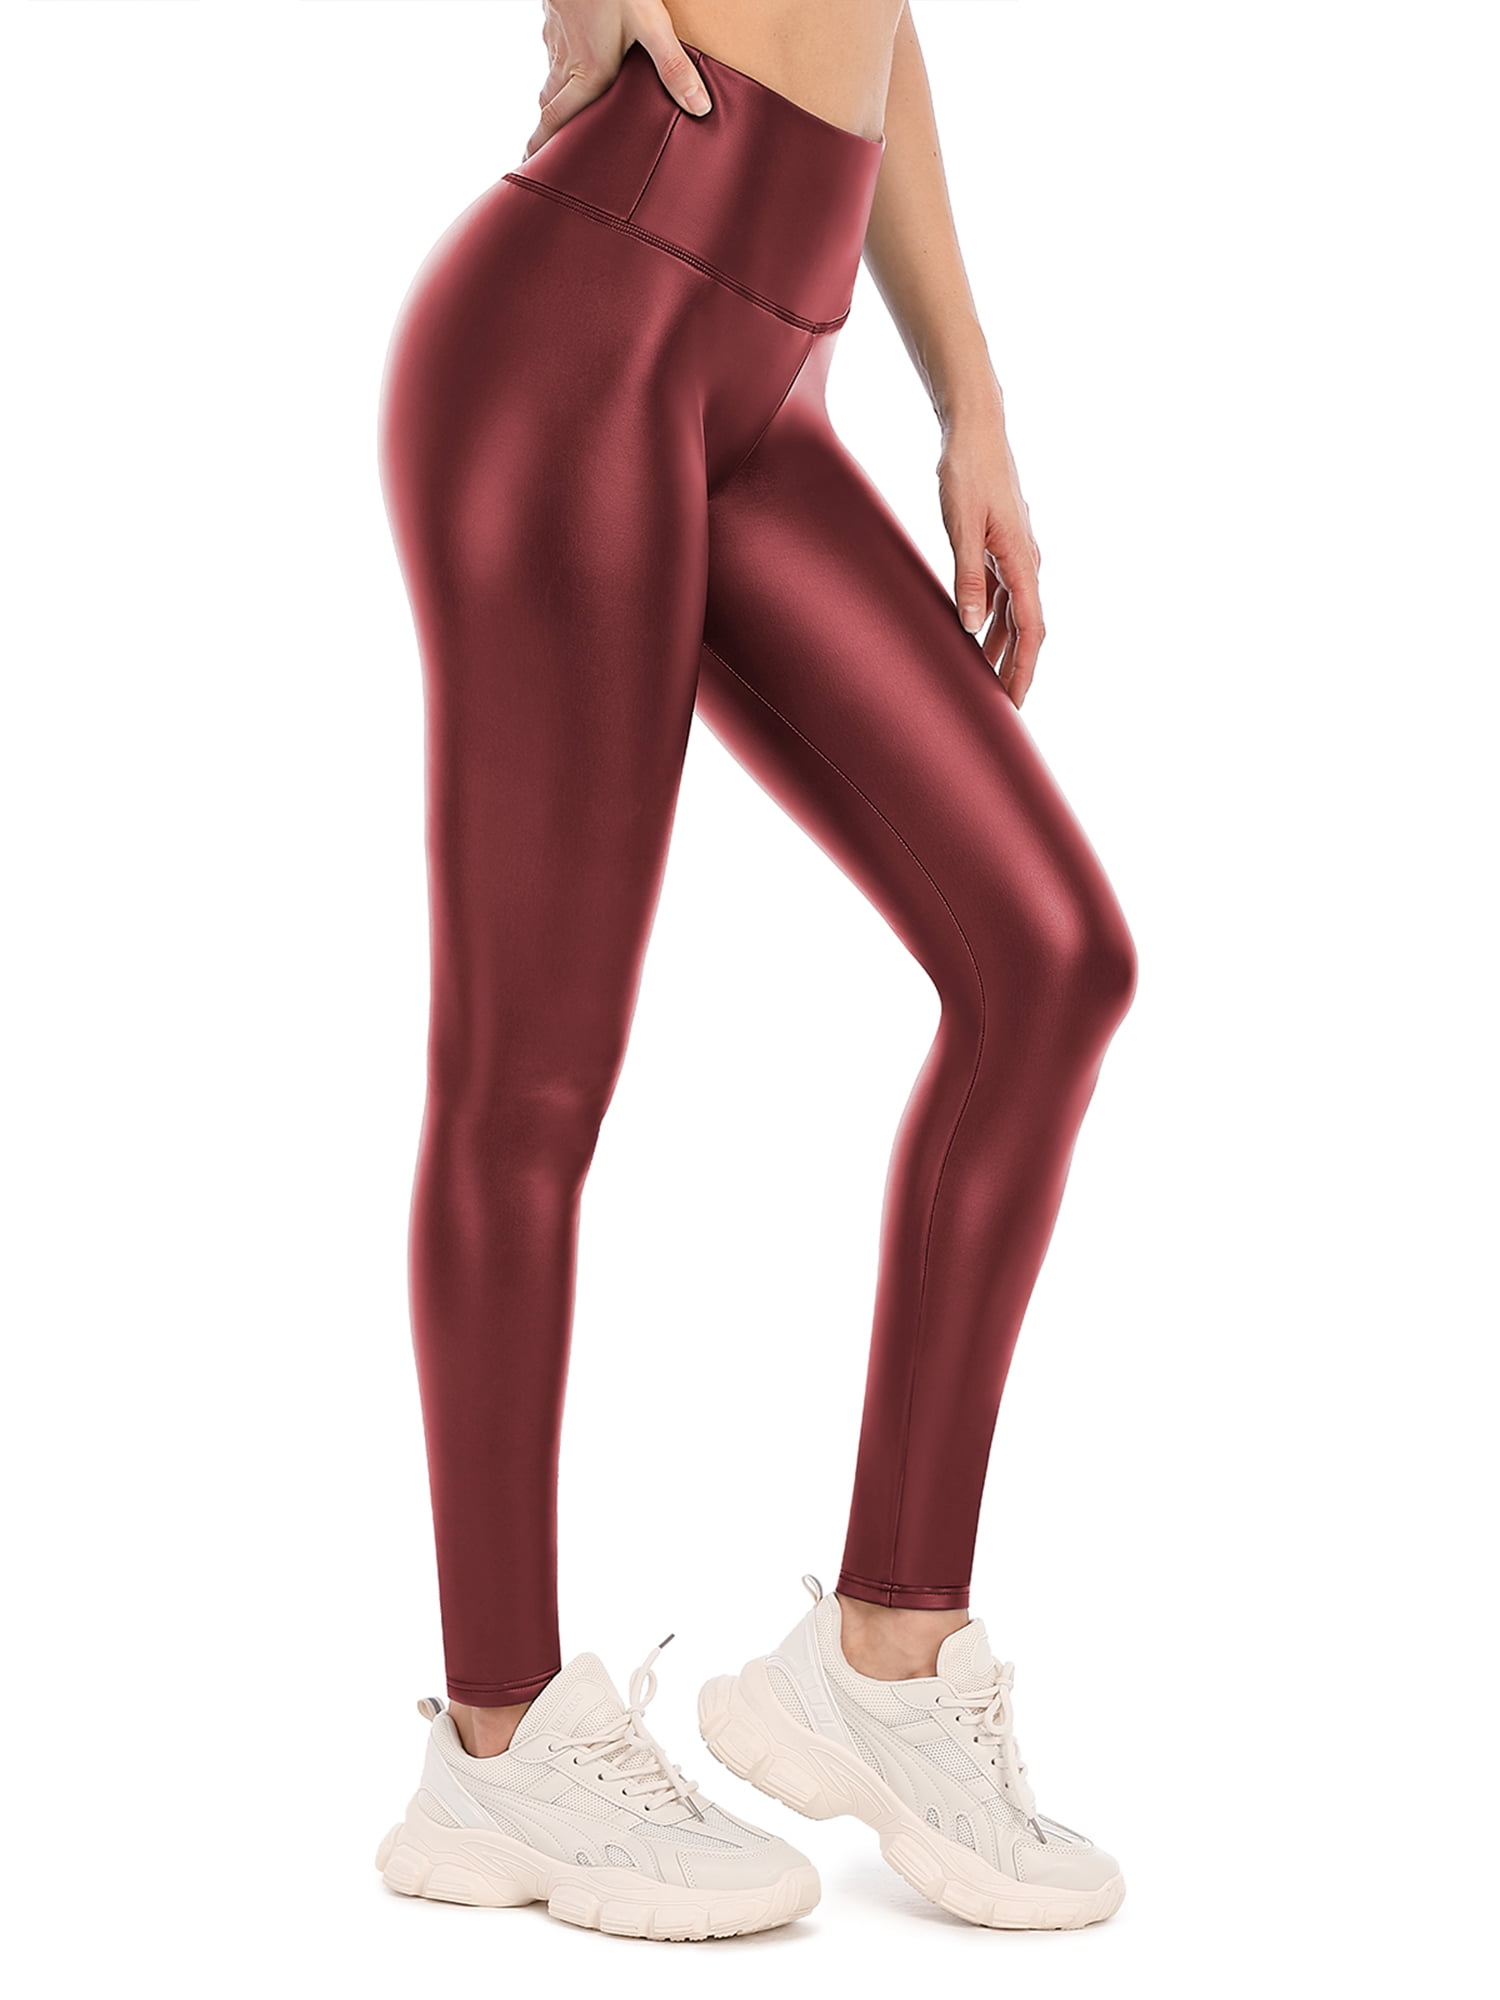 Women's Fleece Lined Leggings Faux Leather Thermal Warm Yoga Pants with  Pockets 